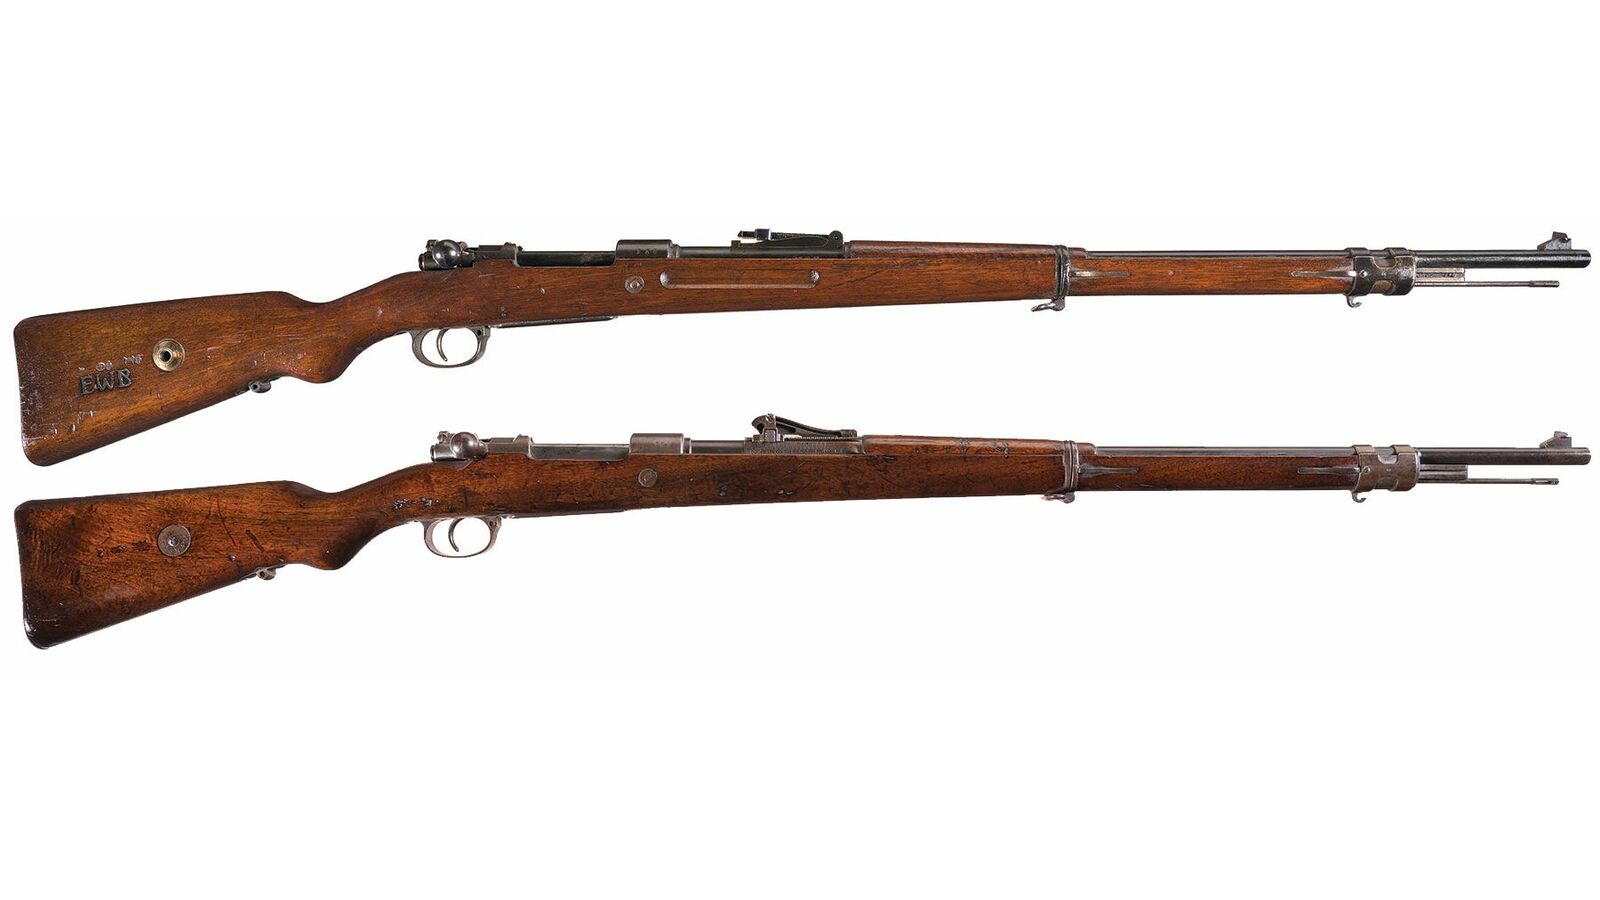 Two GEW 98 Bolt Action Rifles